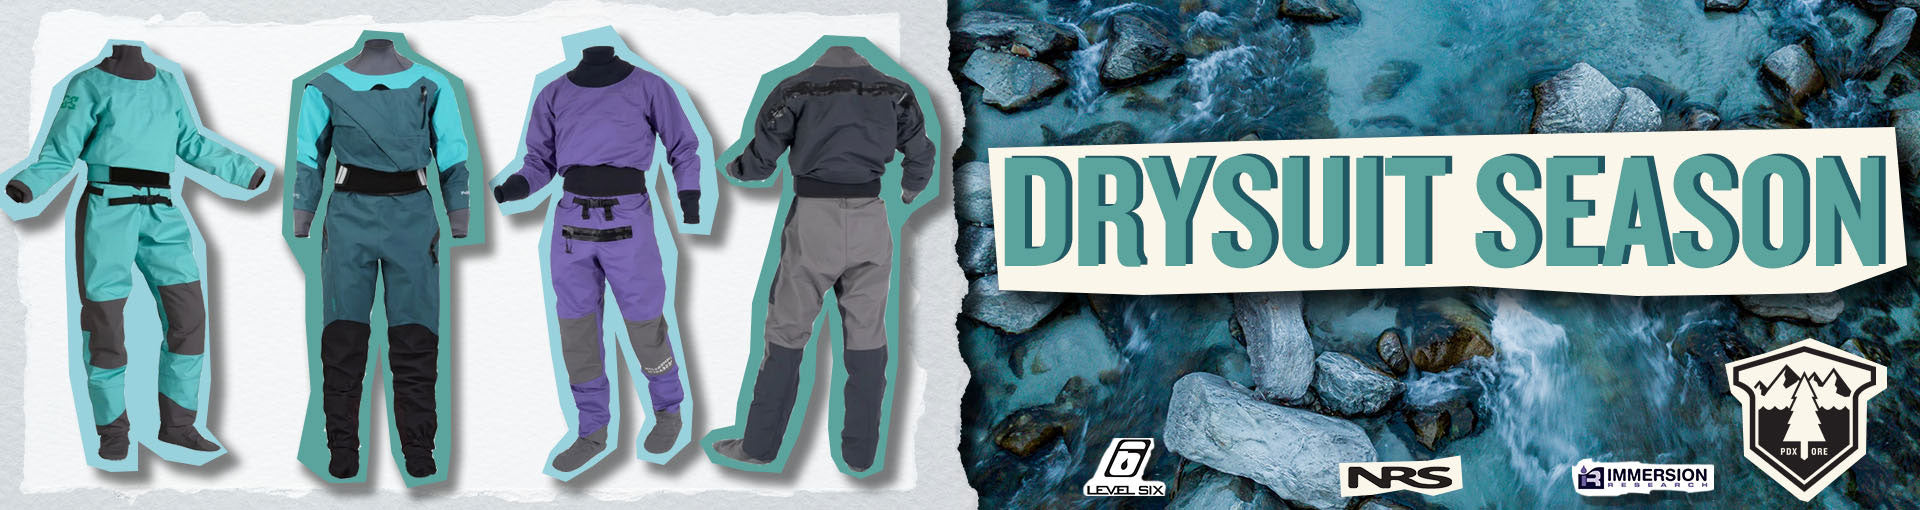 Drysuits and paddling wear for your cold water adventures!